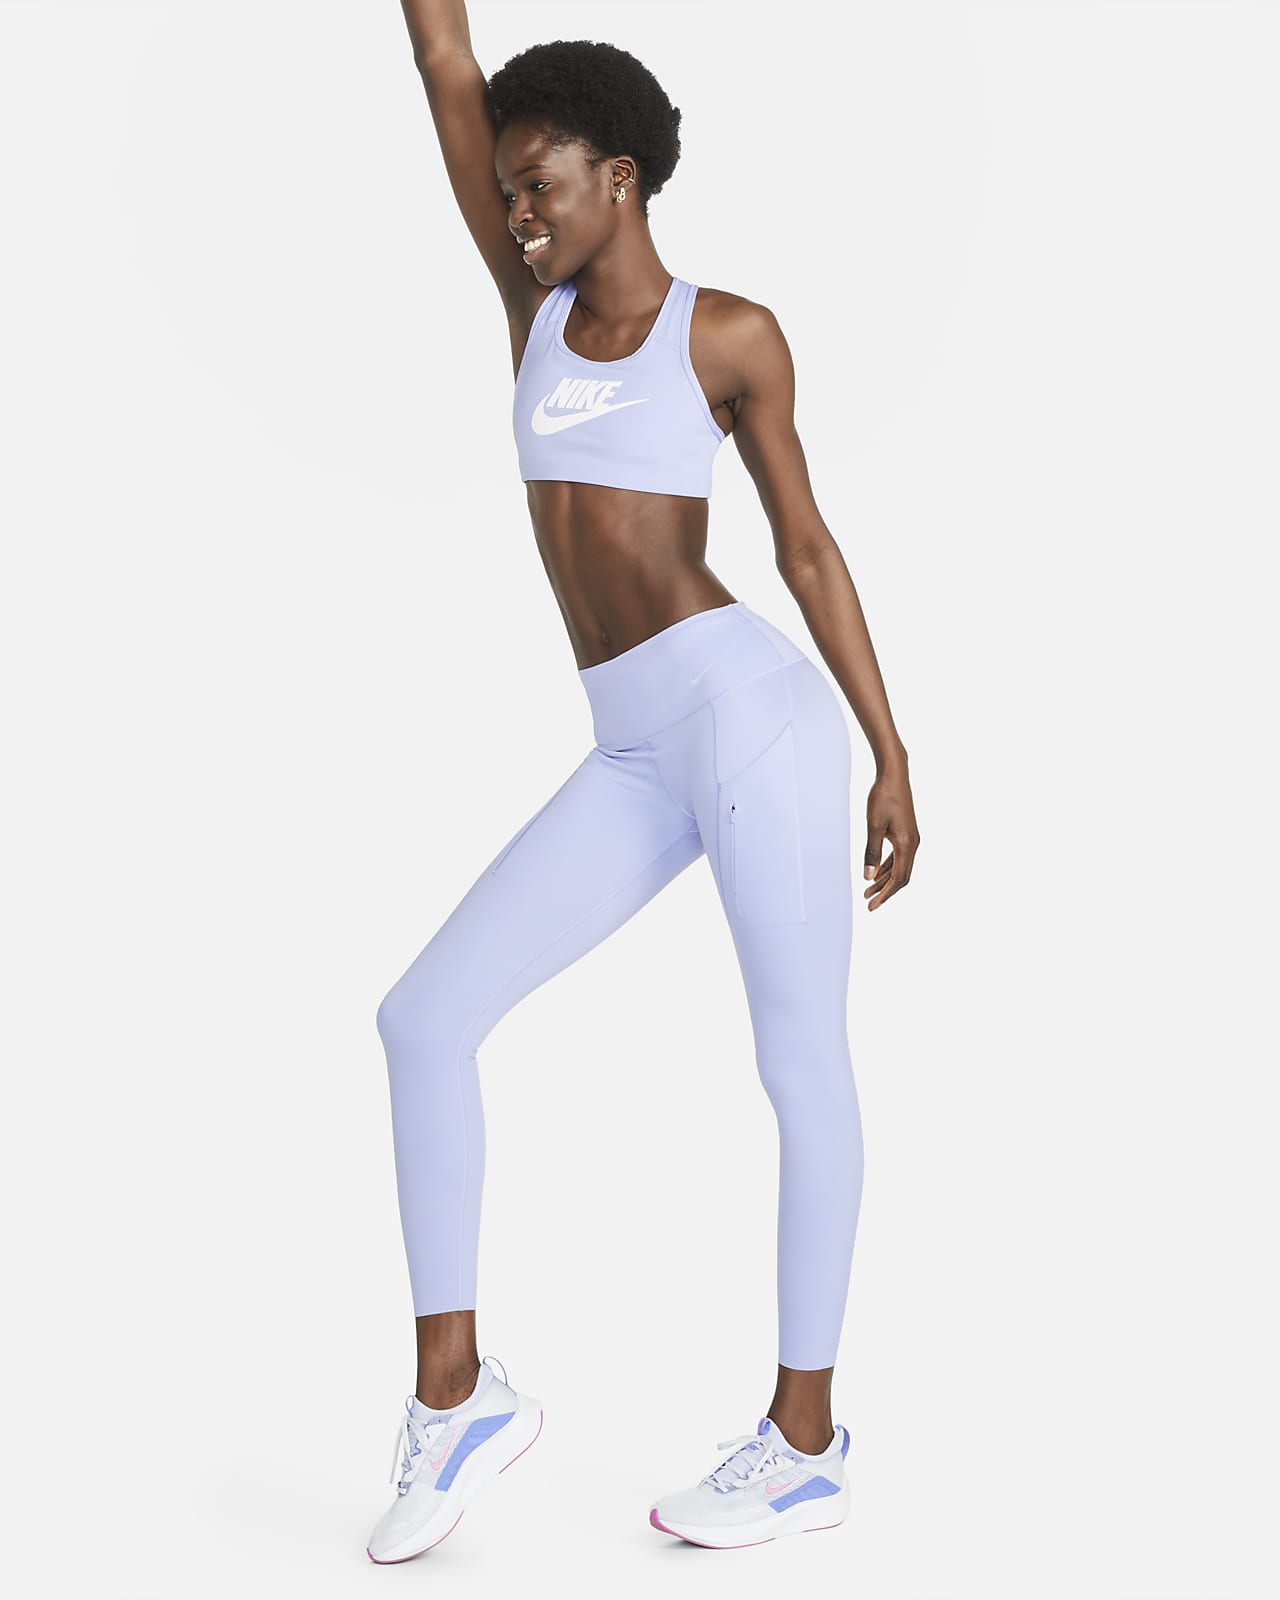 How to Buy the Right Yoga Clothes. Nike LU